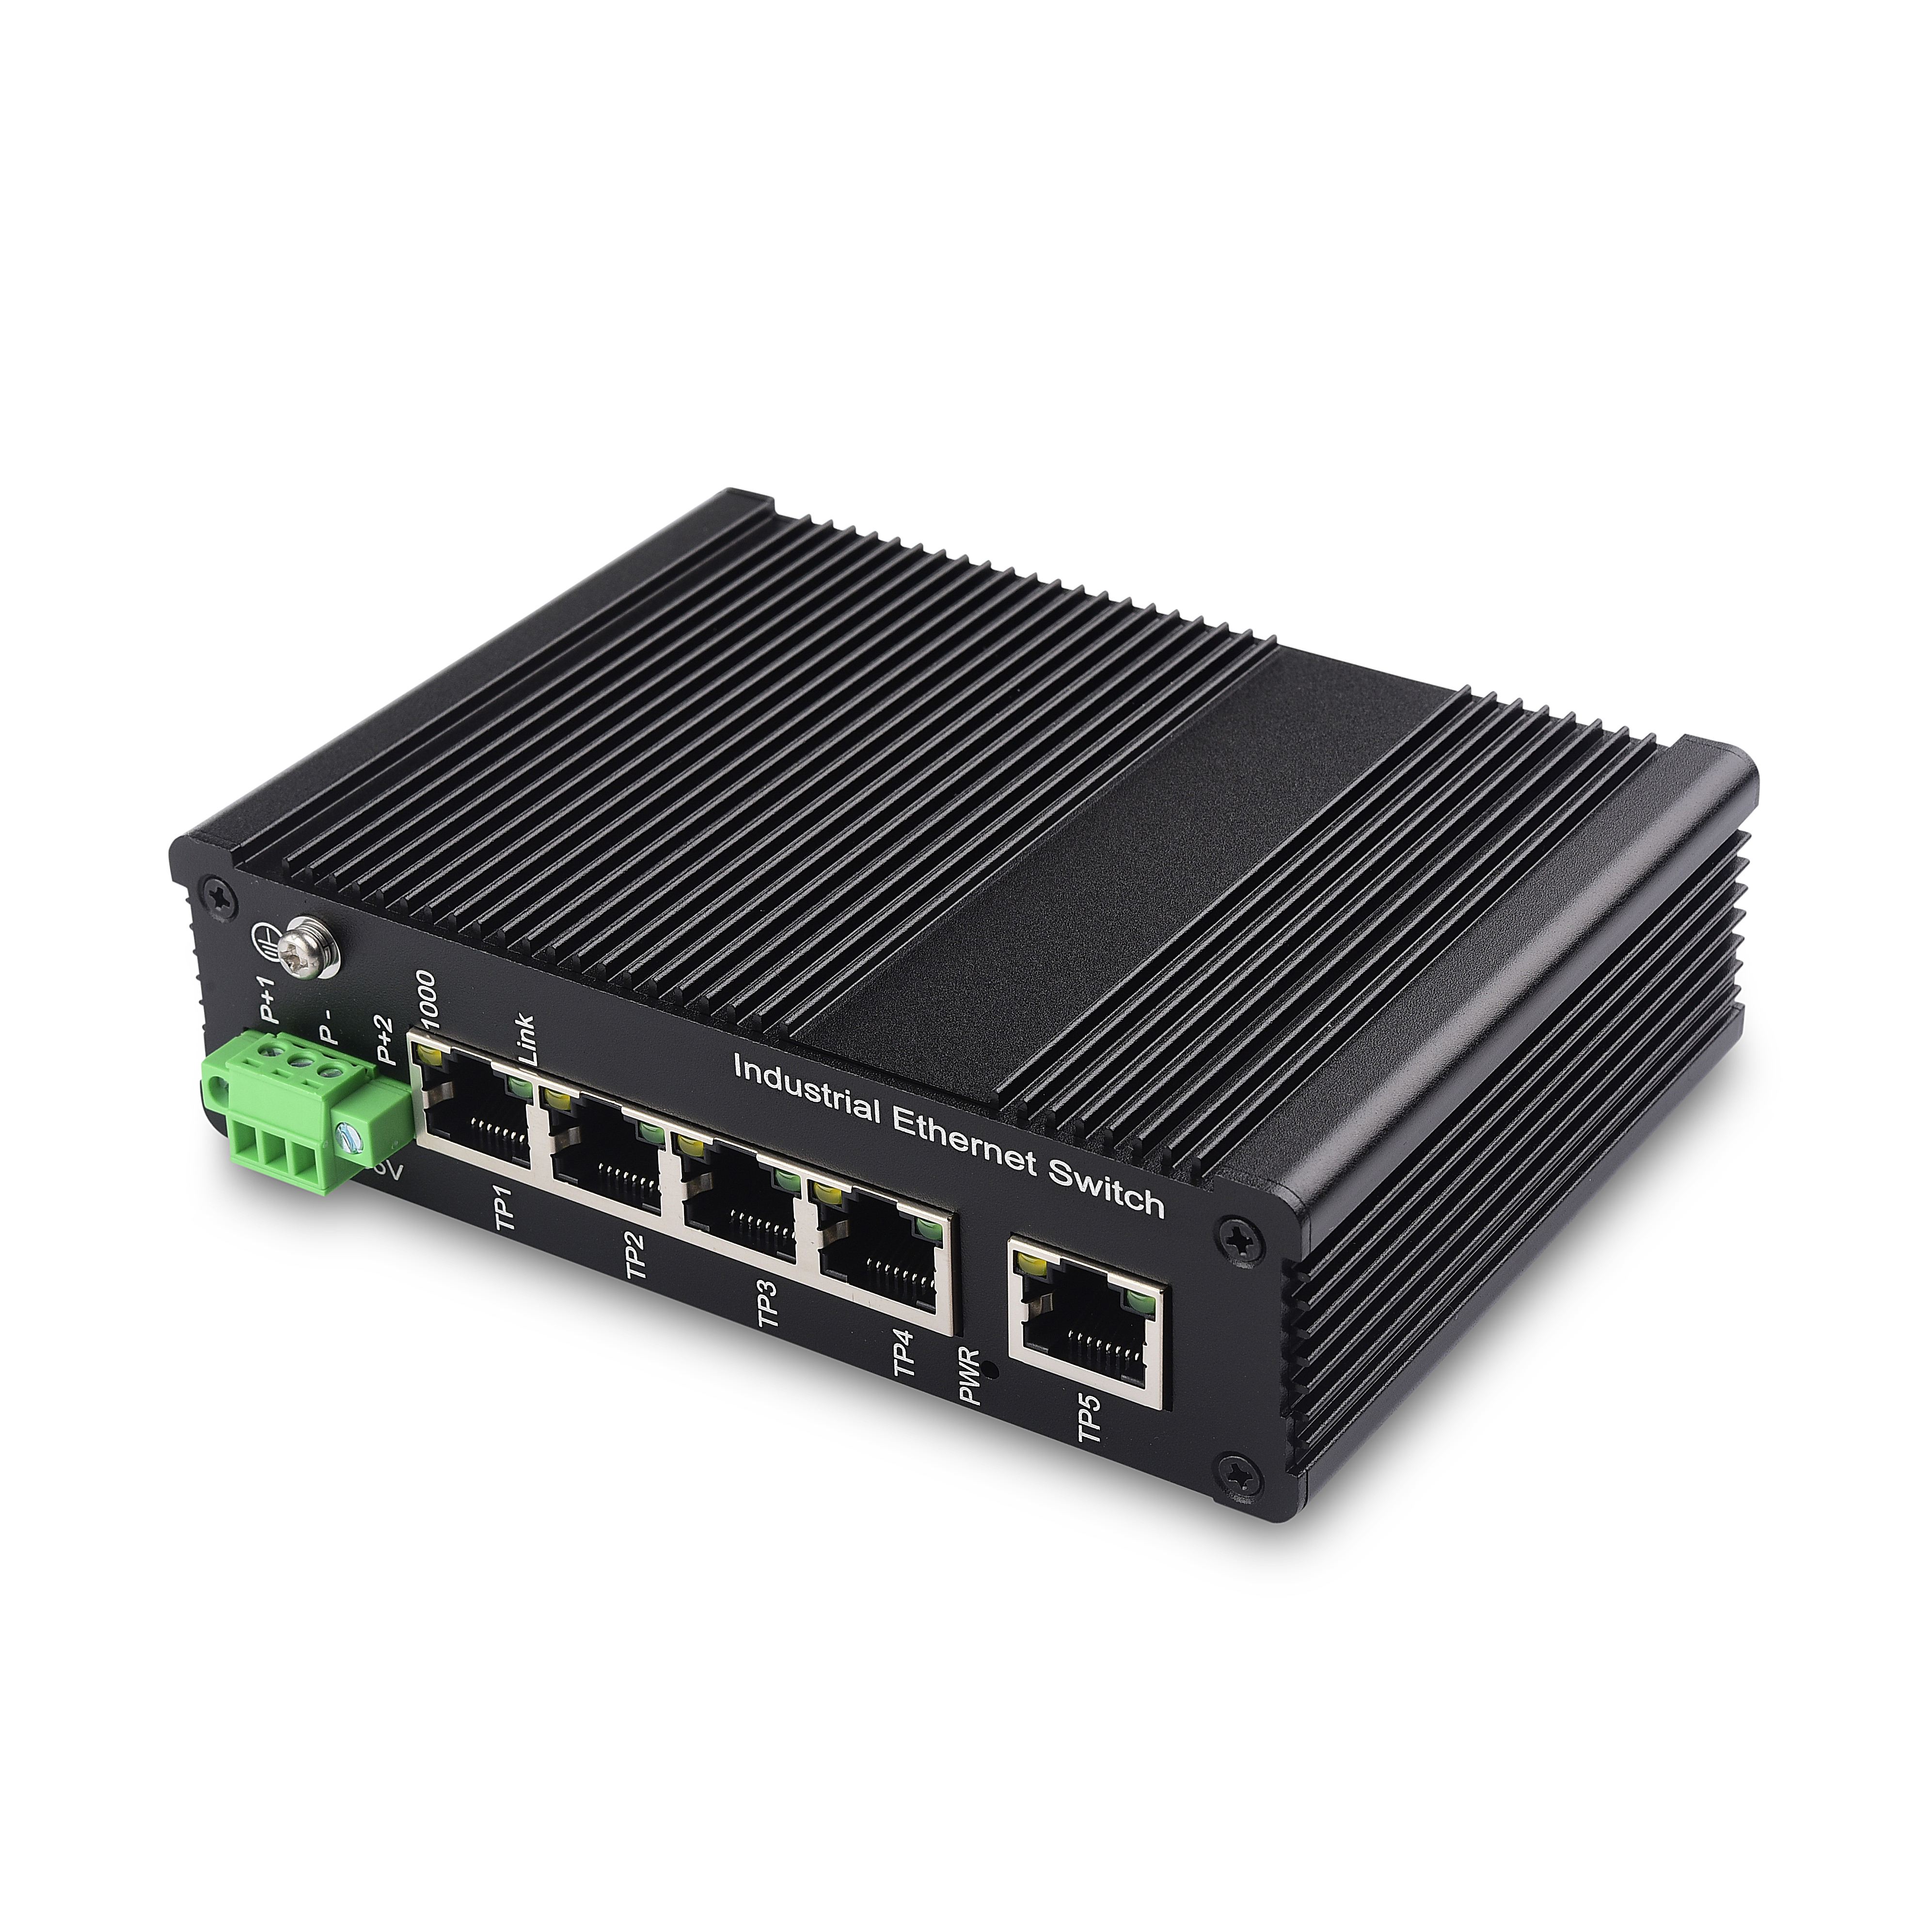 Mini 5-Port Industrial Gigabit Switch, unmanaged, Industrial products, Categories